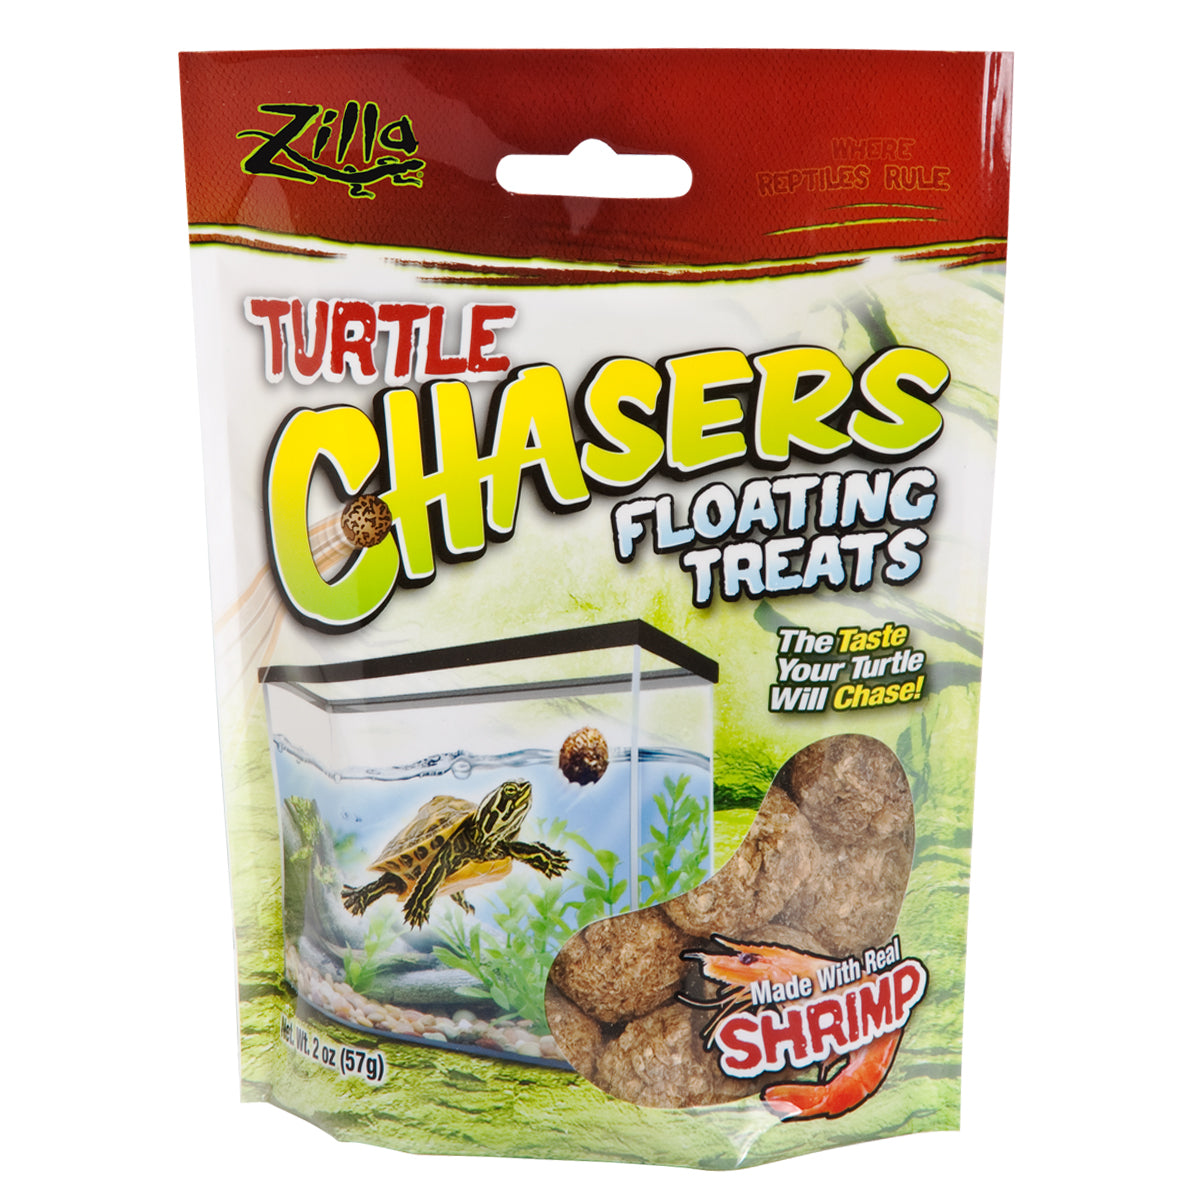 Zilla Turtle Chasers Floating Treats made with Real Shrimp - 2 oz